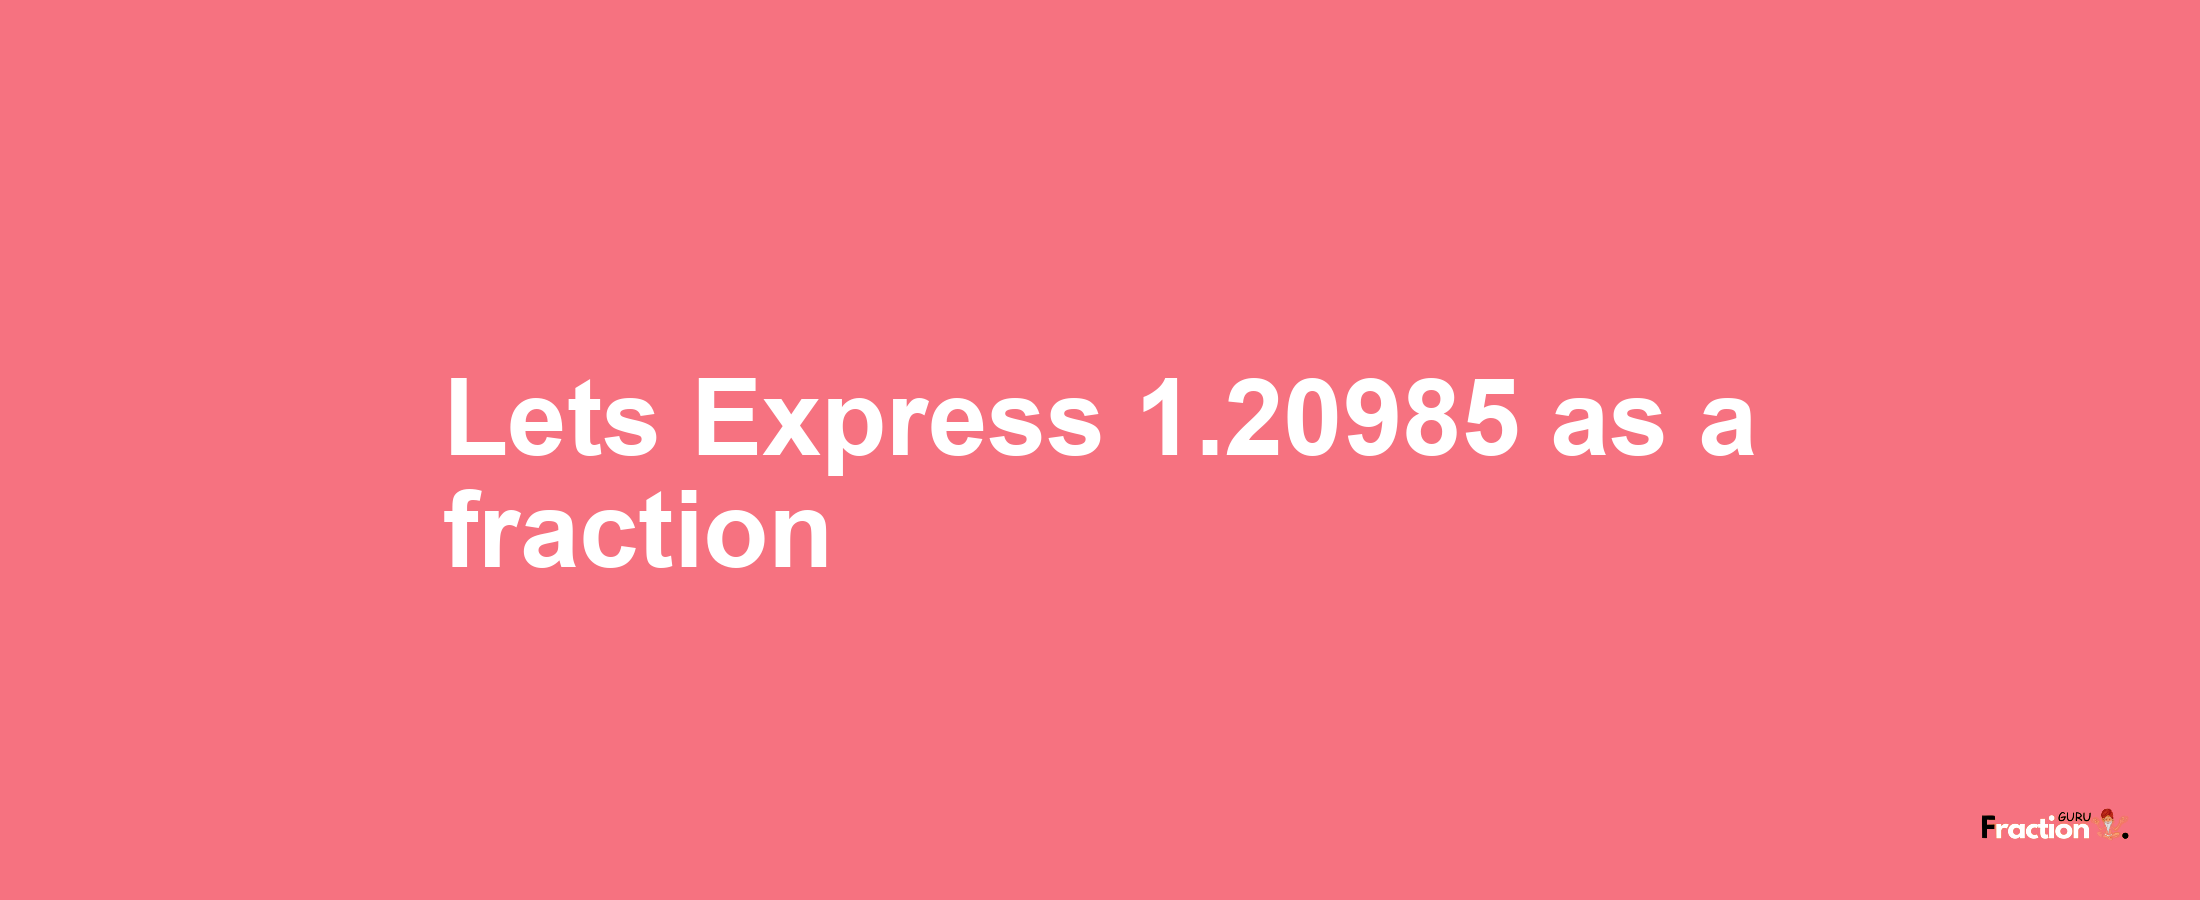 Lets Express 1.20985 as afraction